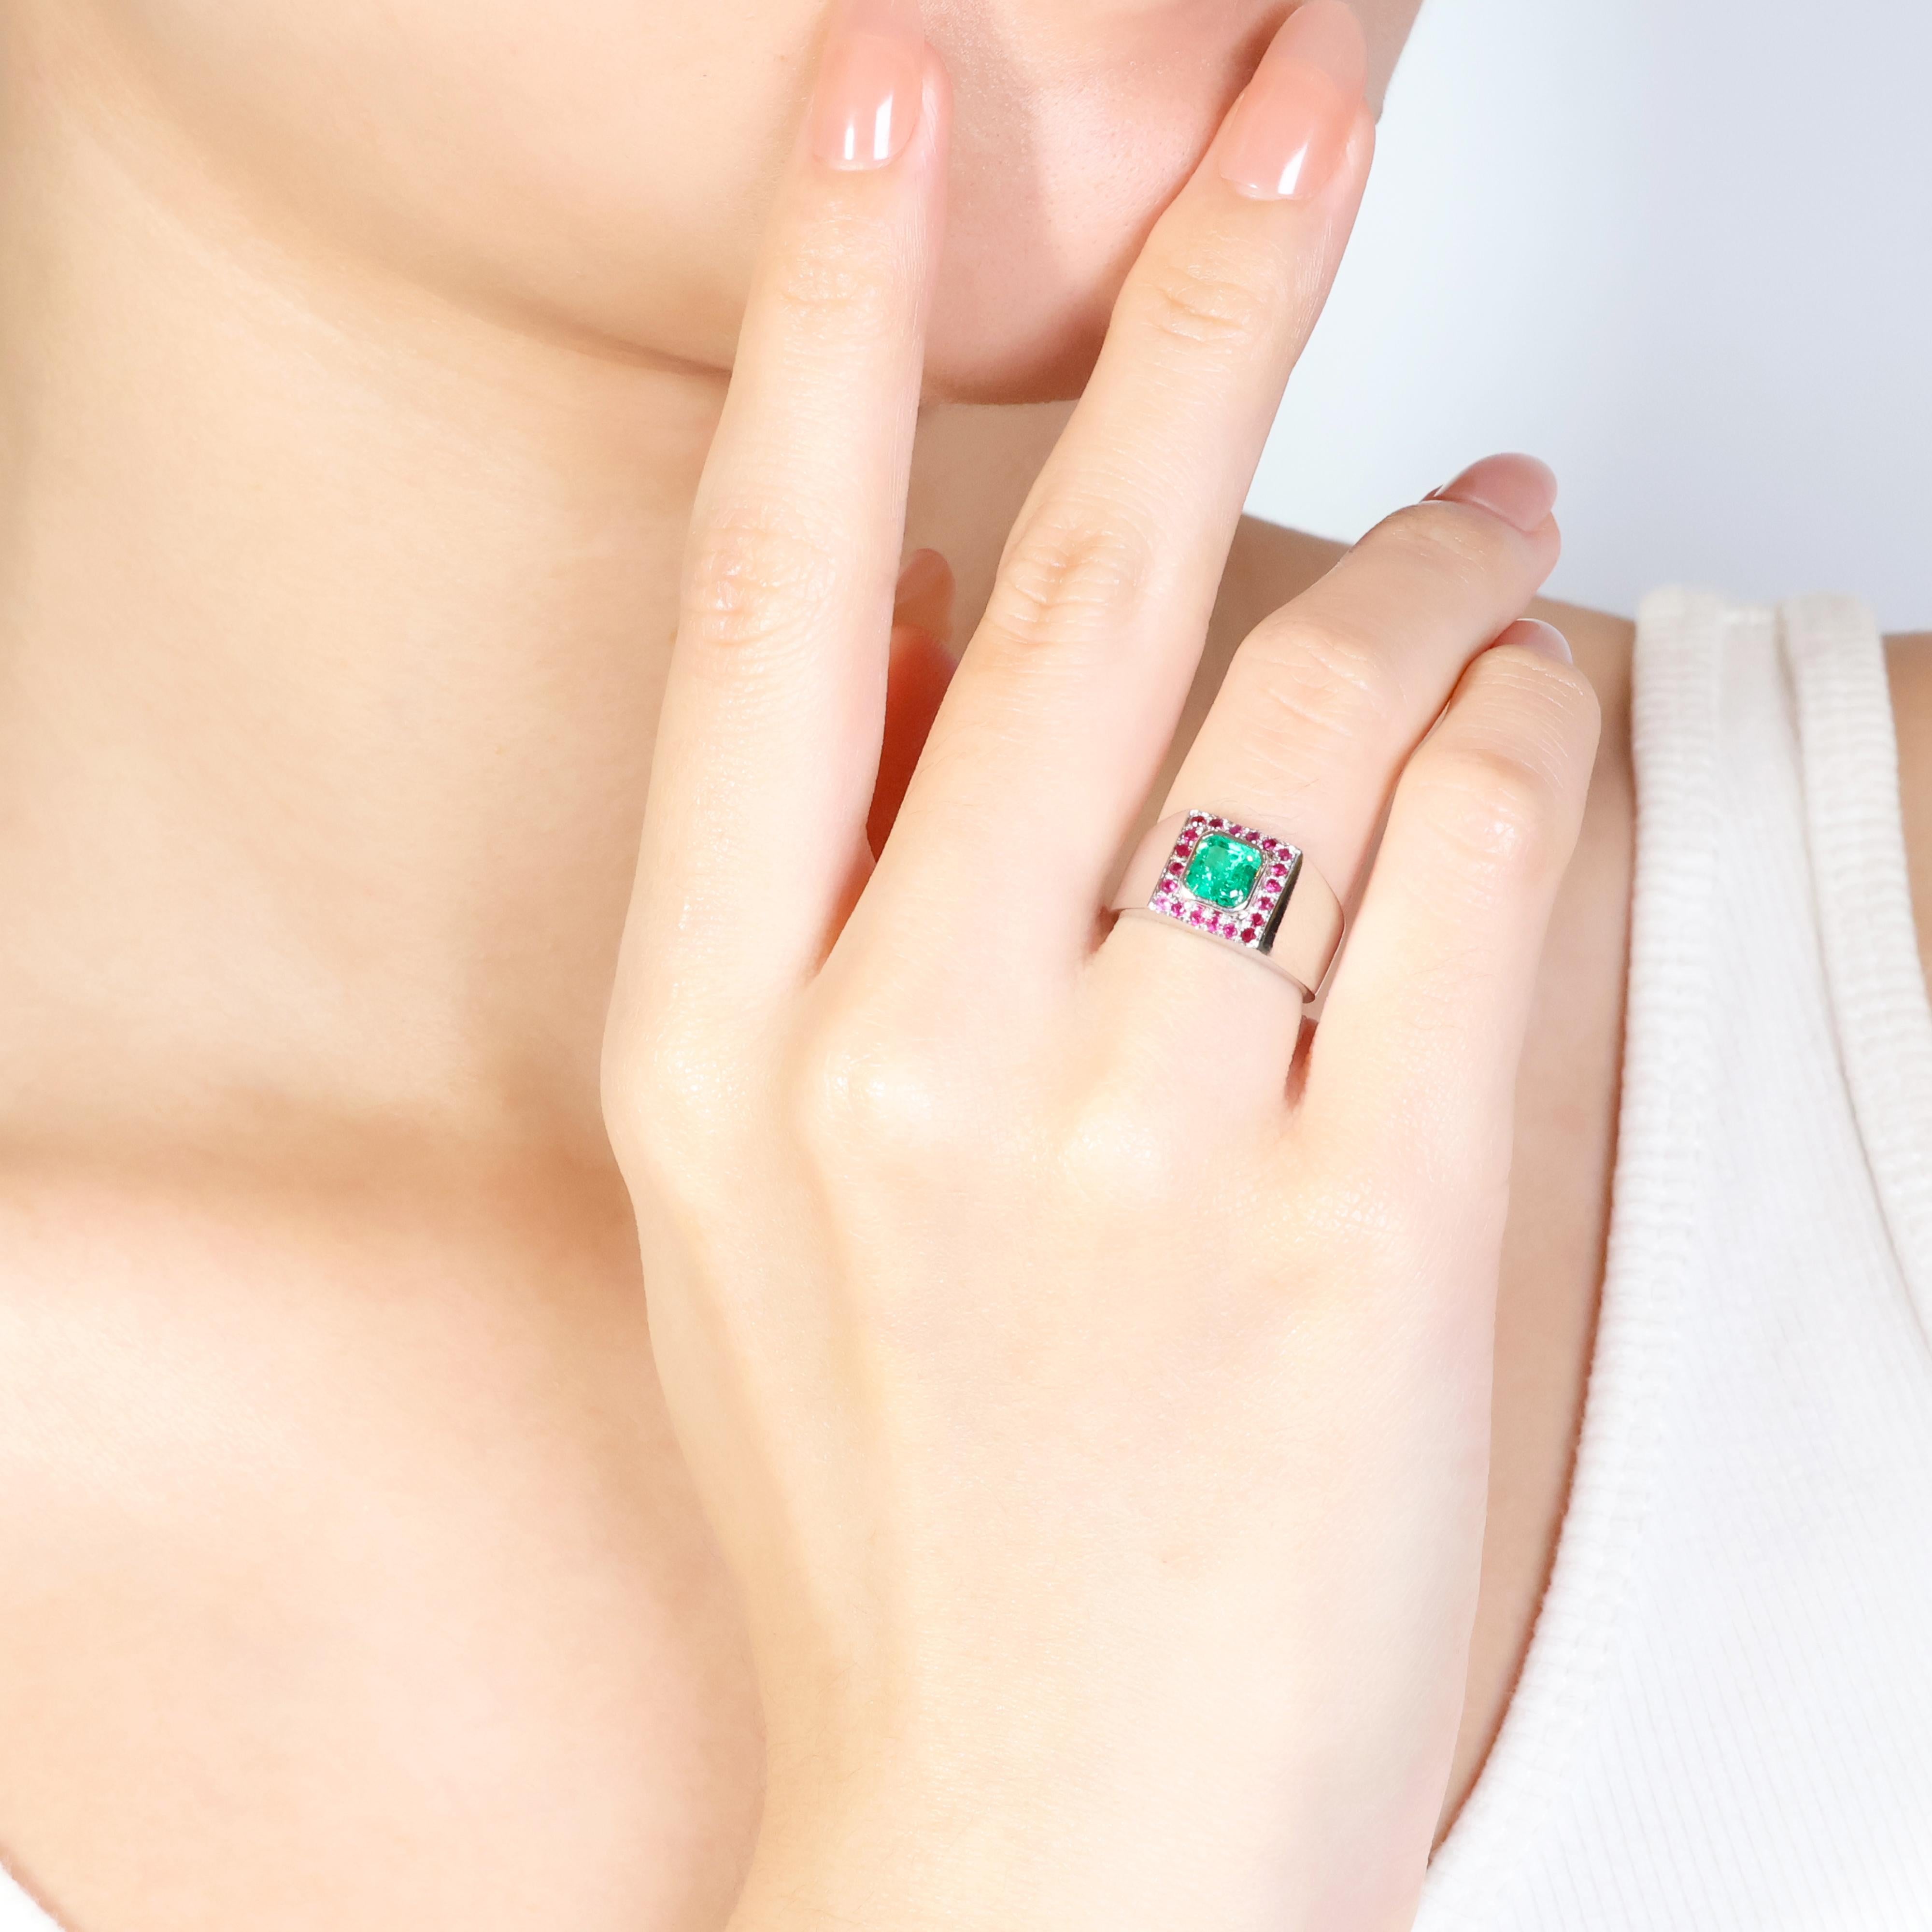 This stunning ring showcases a captivating centerpiece a single, round emerald boasting a vibrant green color and weighing an impressive 0.85 carats. The emerald's brilliance is further accentuated by a halo and shank adorned with 20 round brilliant